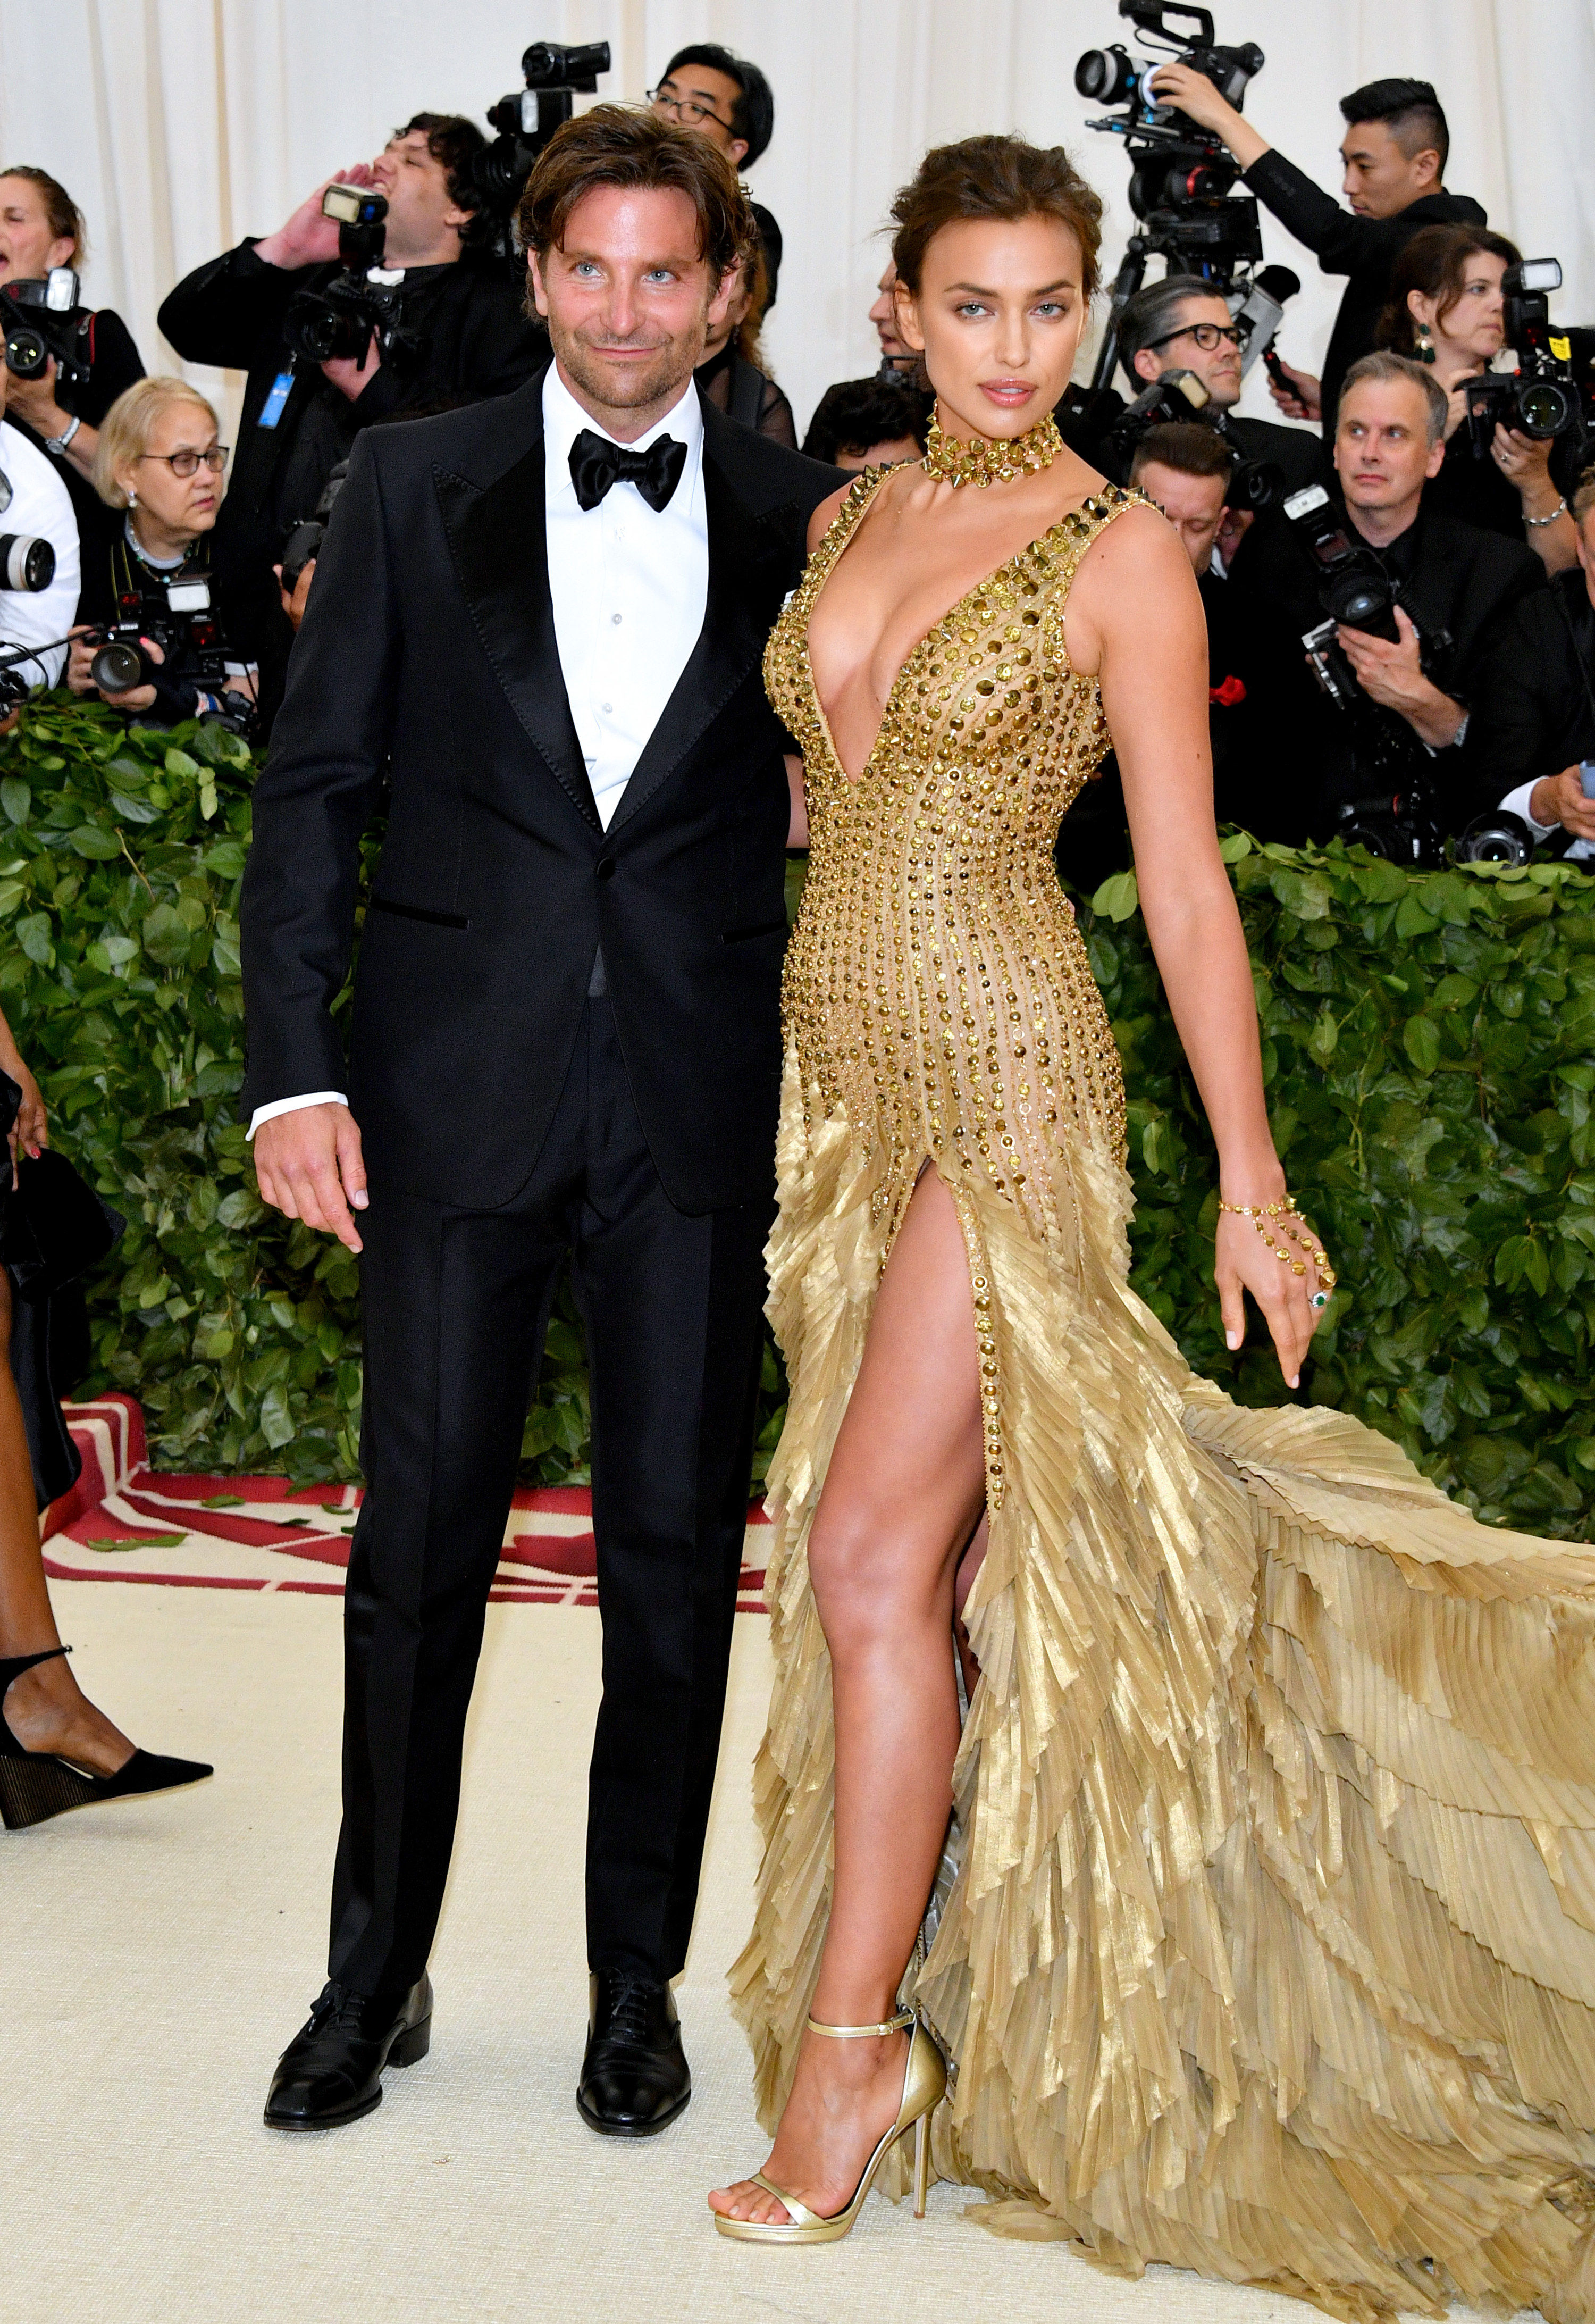 Bradley in a tux and Irina in an all-gold dress with sequins and a long train stand together